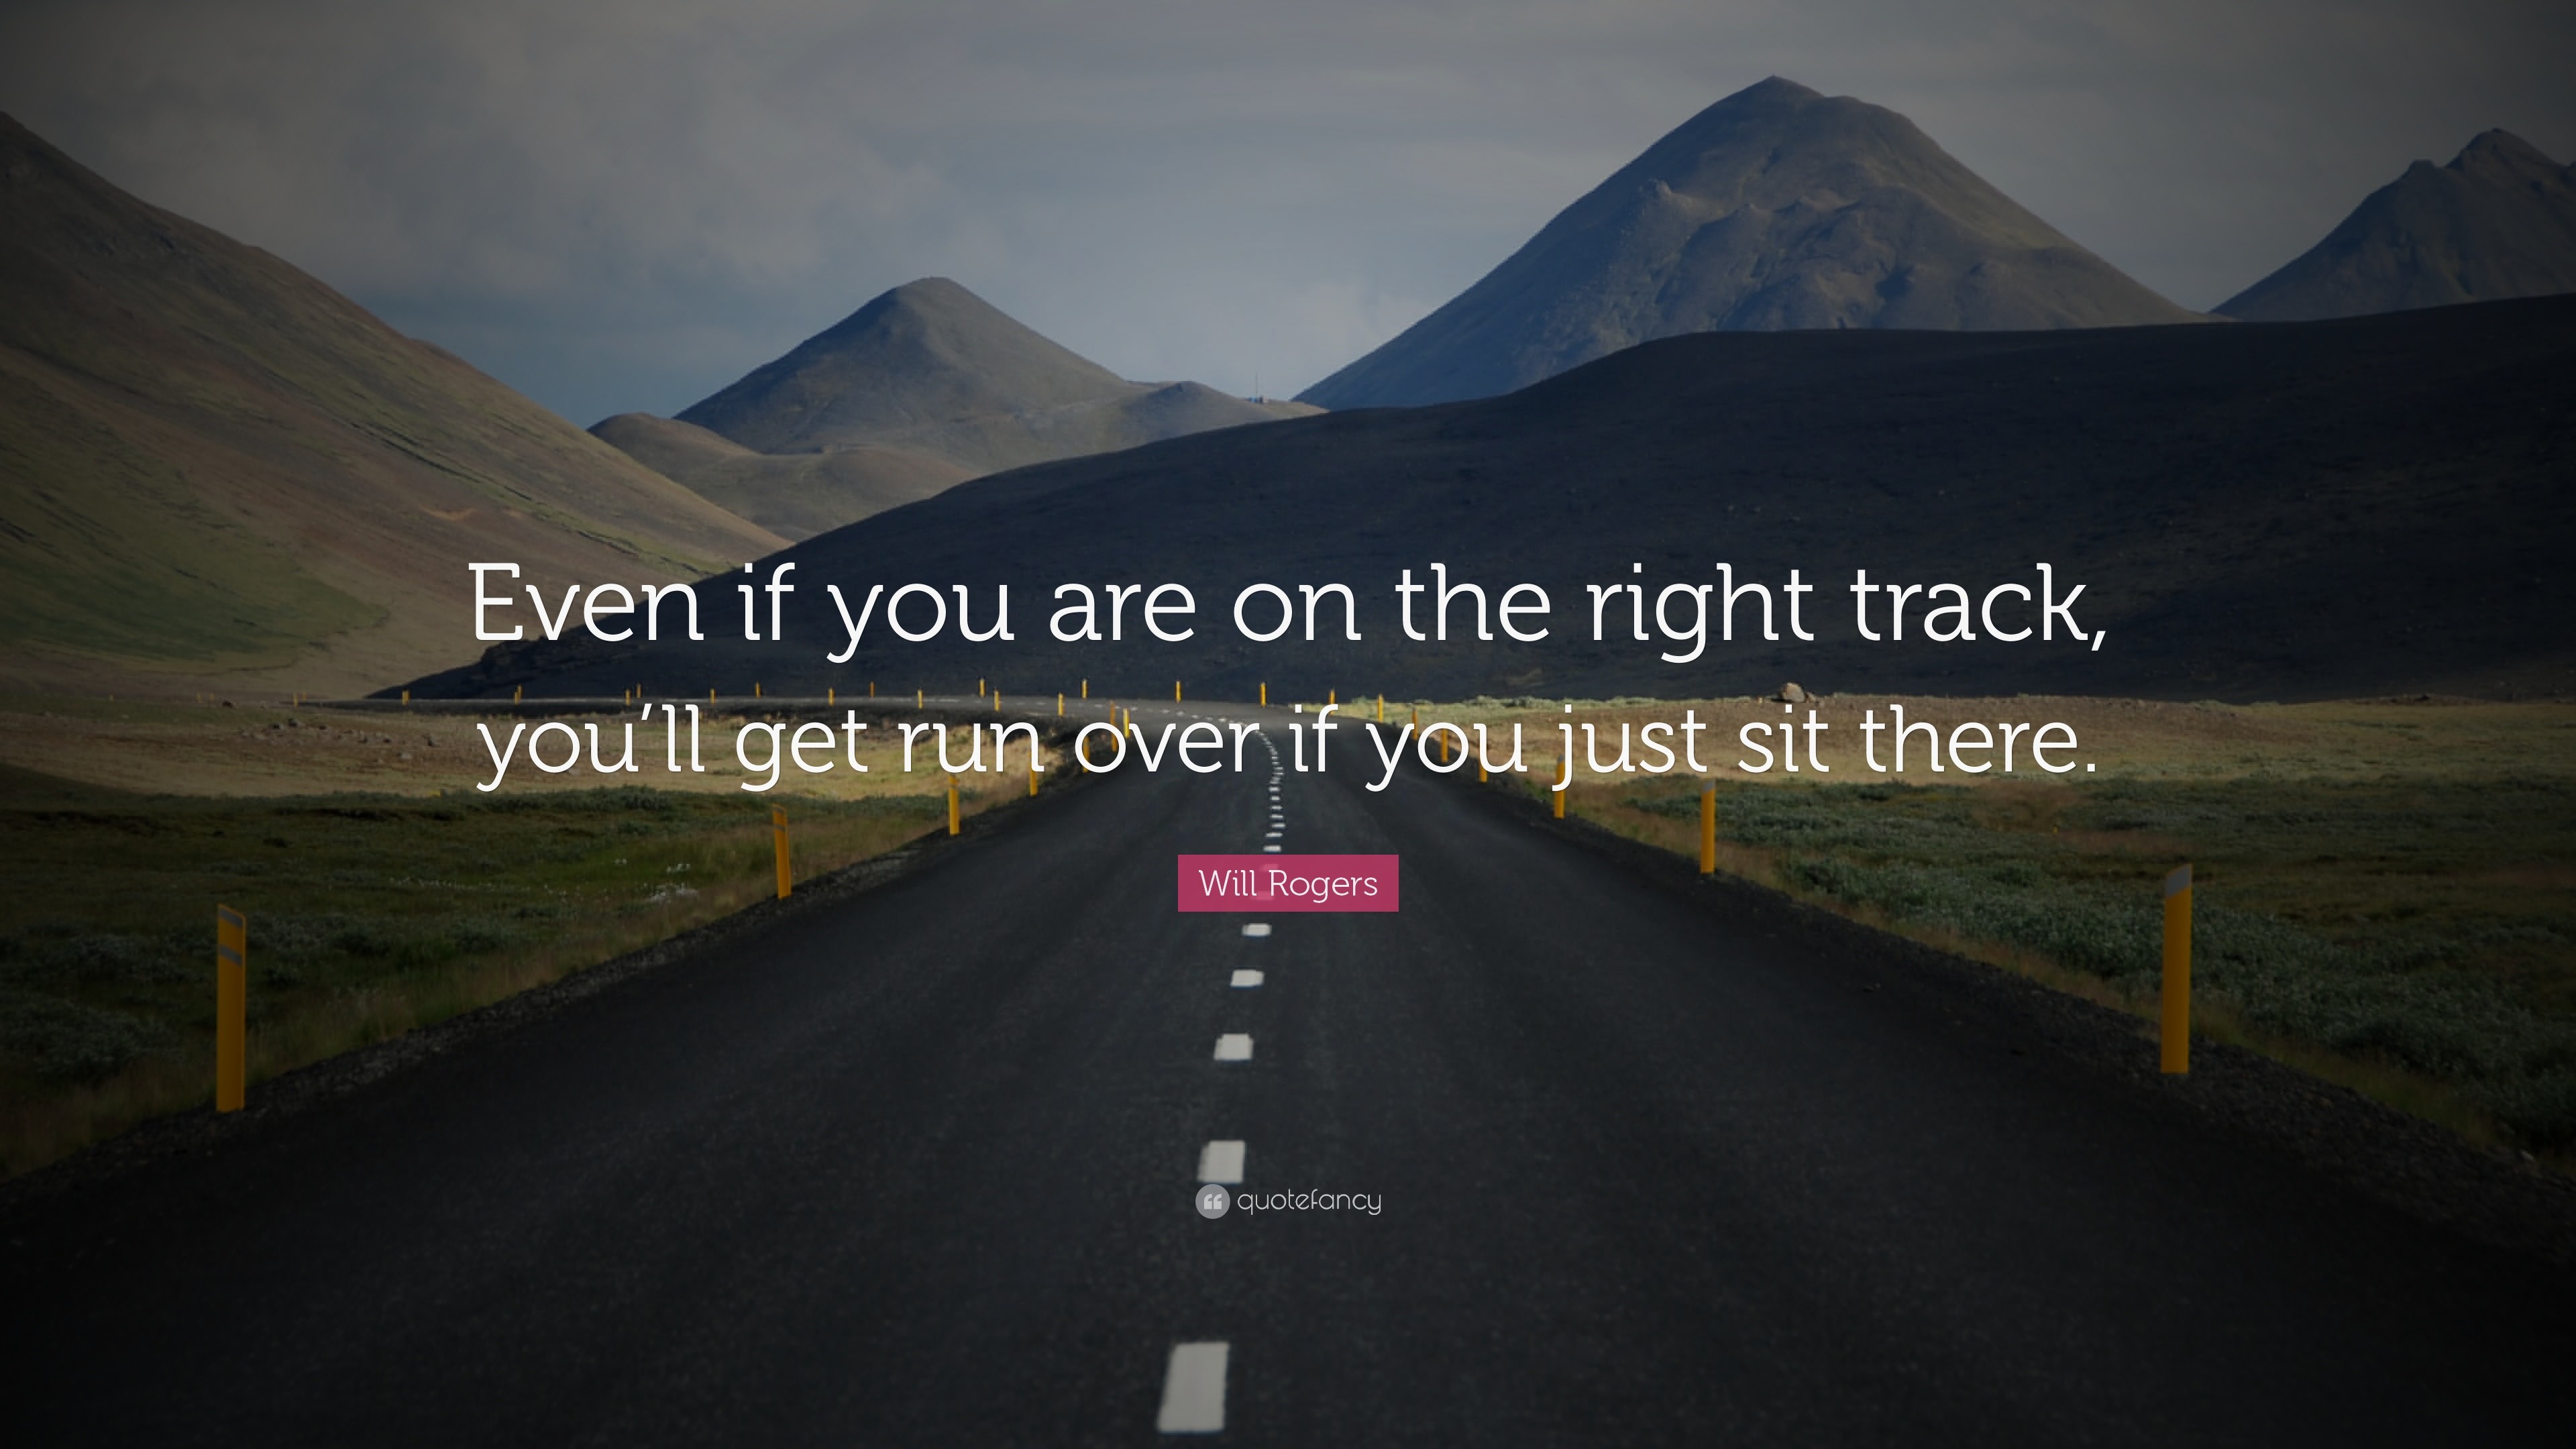 Positive Quotes Even if you are on the right track, youll